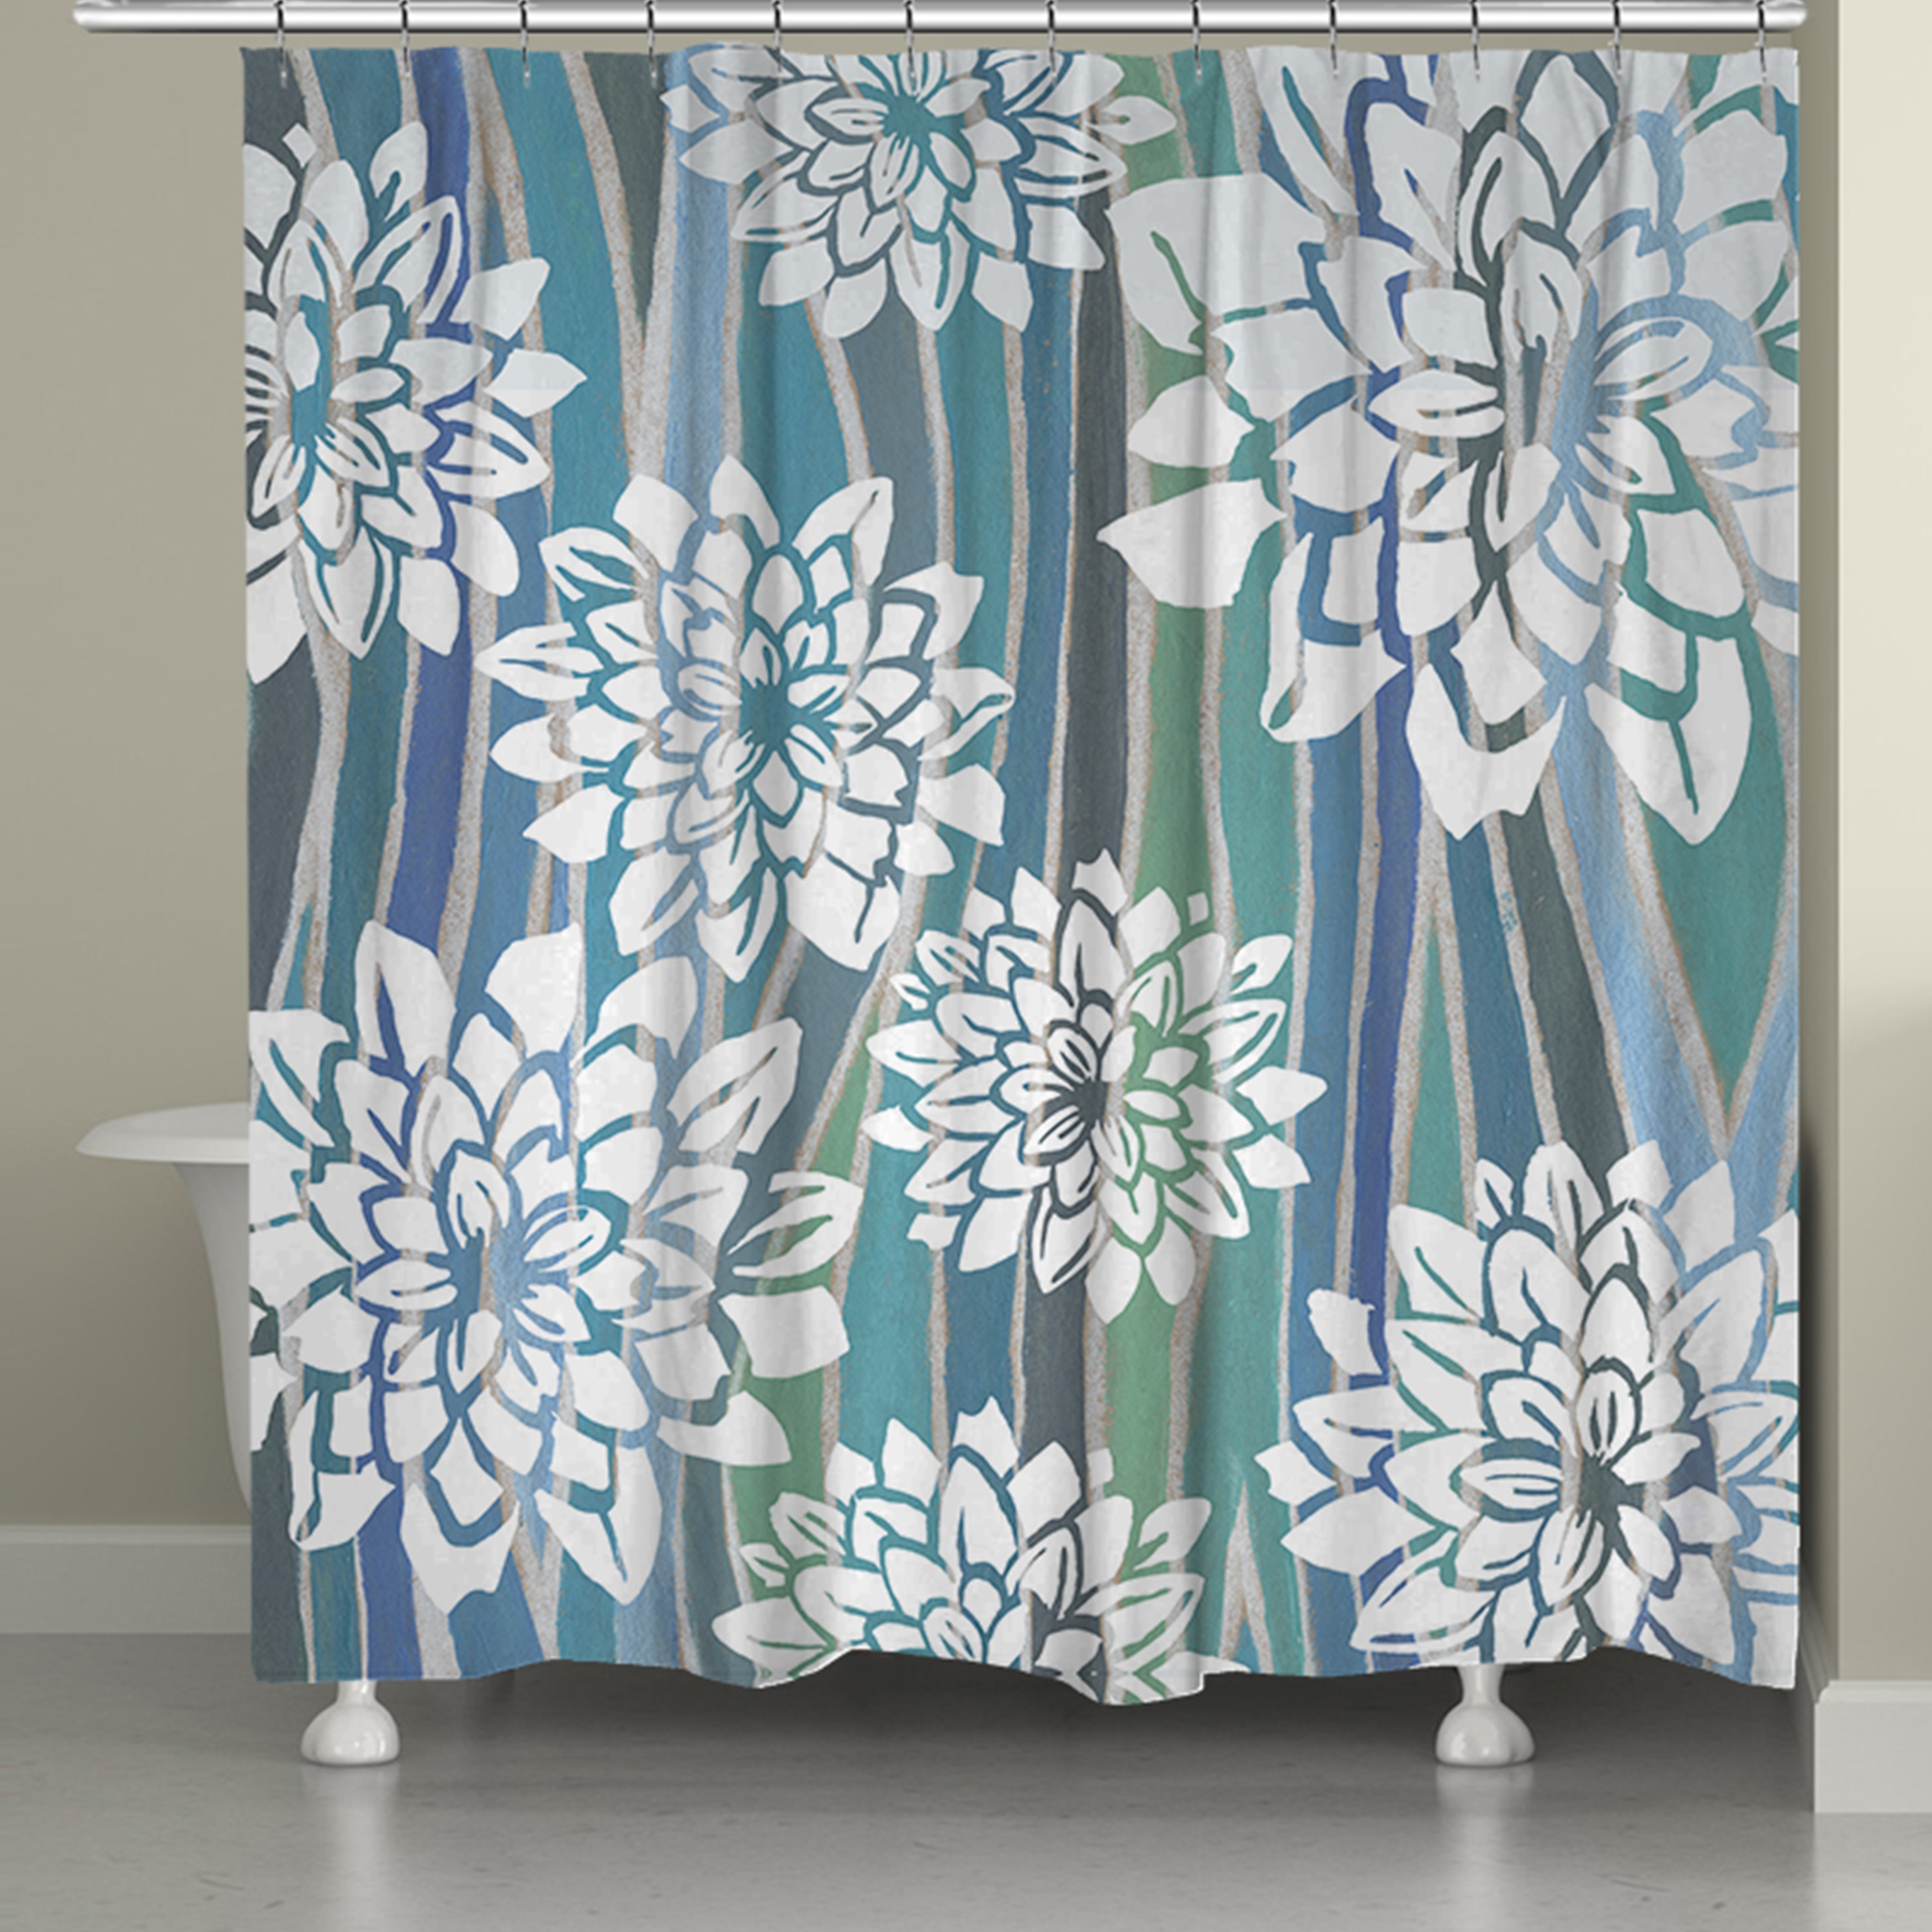 74 inch length shower curtain liner